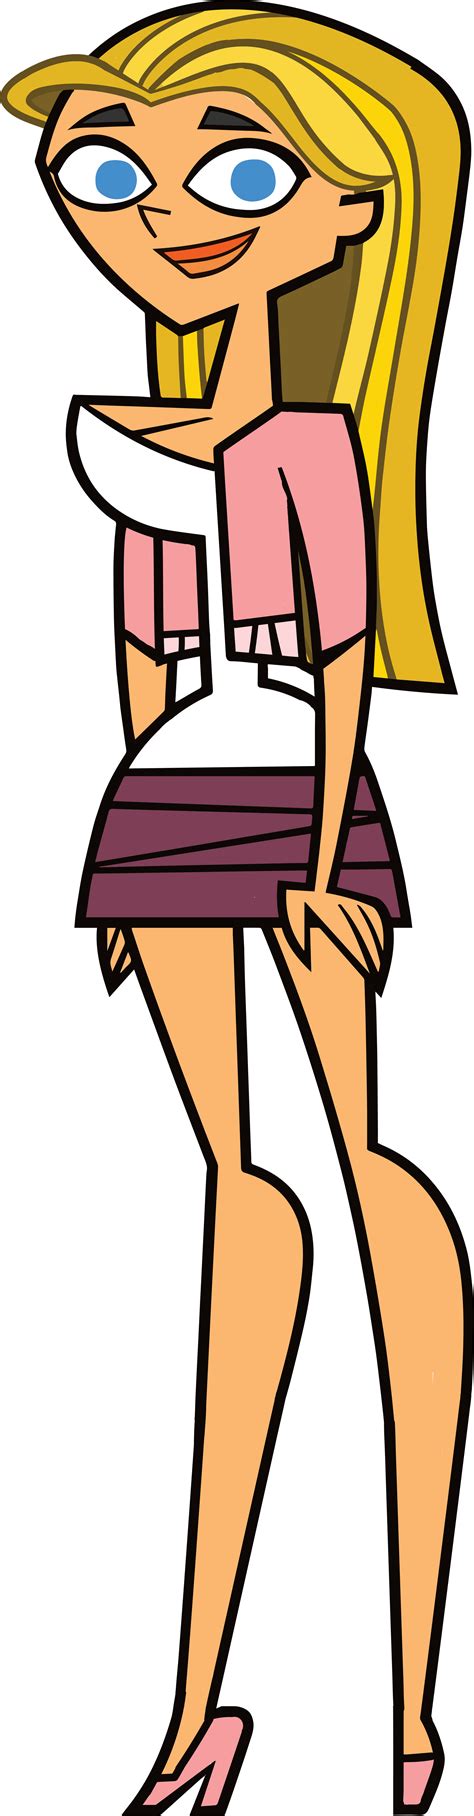 Tdi lindsey. This Roblox Total Drama challenge I pretty much act as Lindsay like in the show and try to make it to the finale!If you have any challenge ideas! Make sure t... 